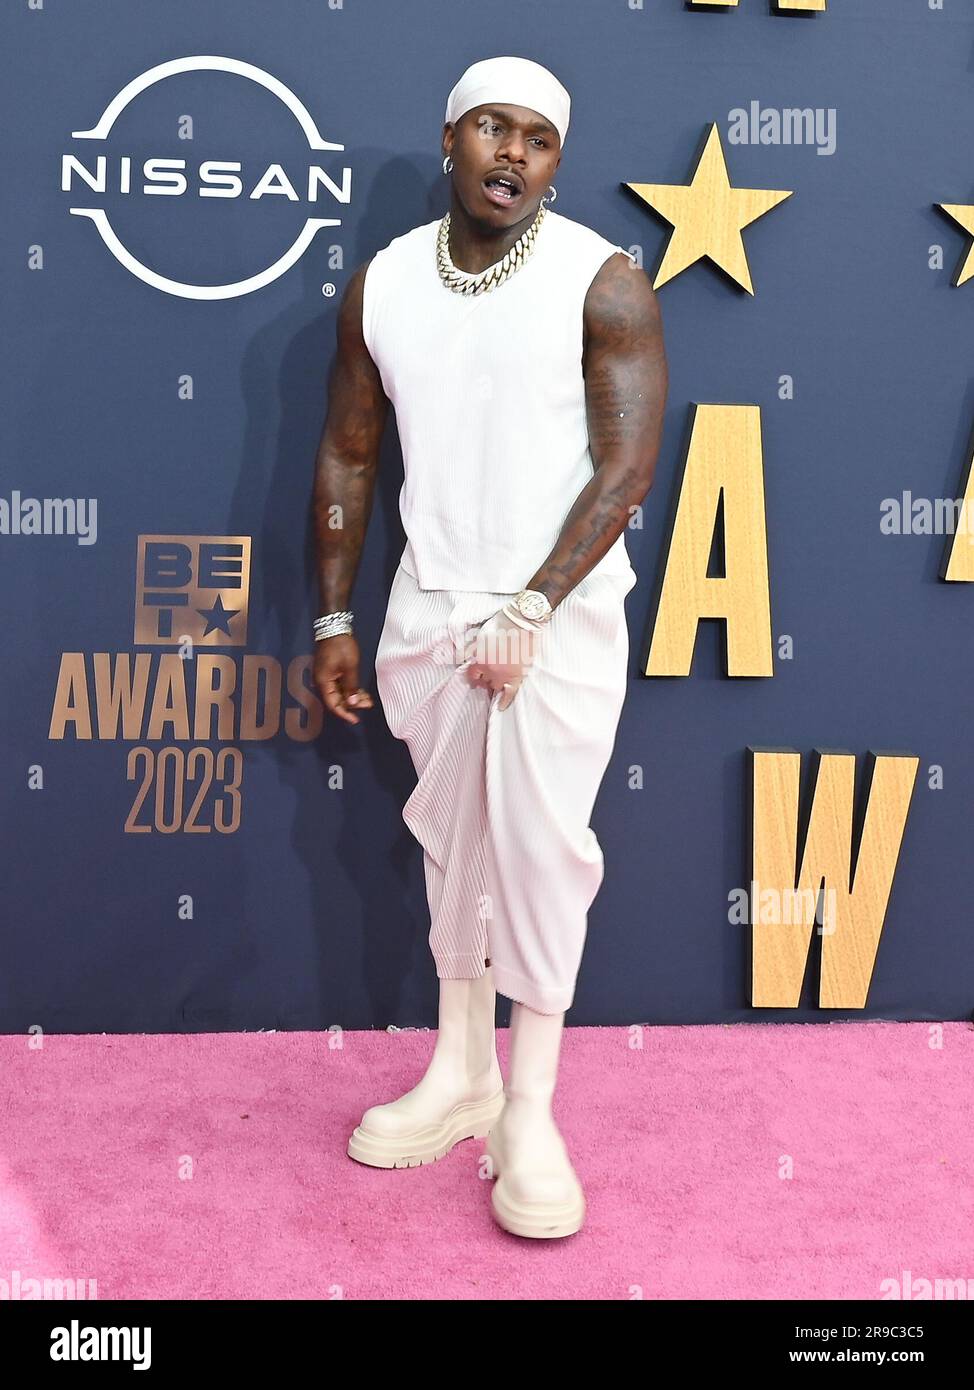 Download Dababy Jersey Outfit Wallpaper